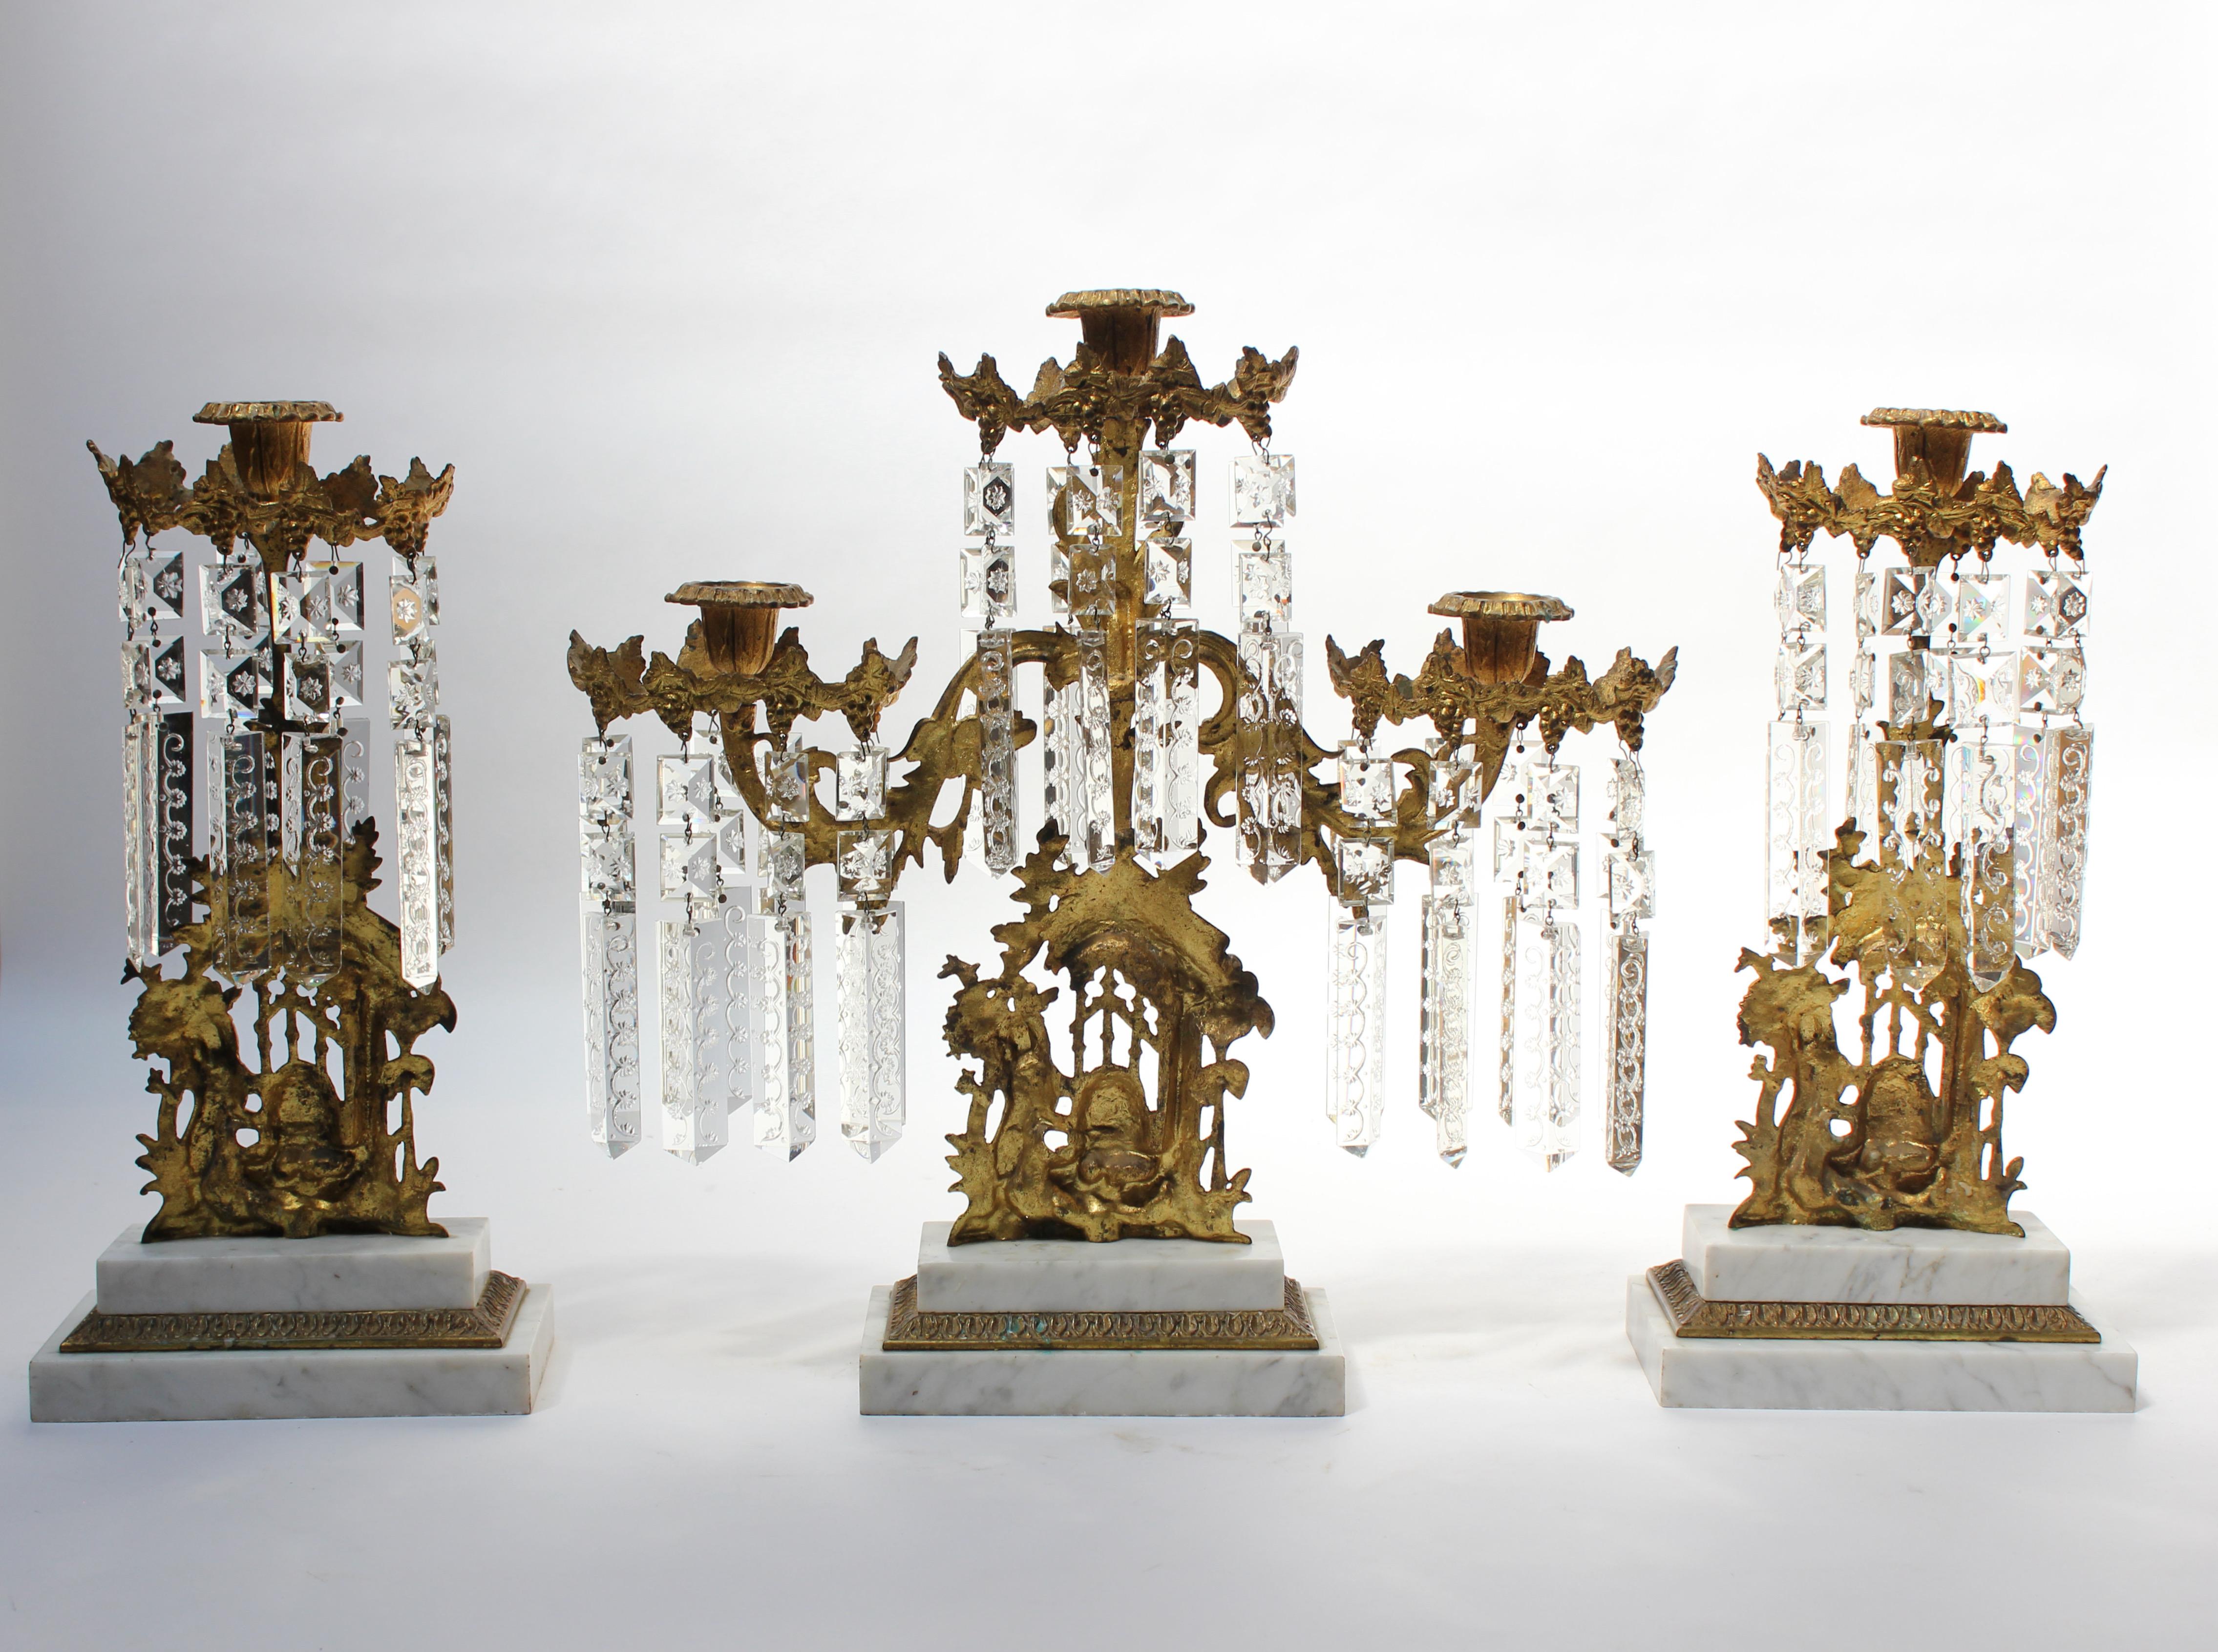 Rococo girandoles composed of gilt metal with stepped marble bases and etched lead-crystal prism decoration (ca. late 19th Century, France). The centerpiece candelabra features three branching arms accommodating three candles, while the smaller two